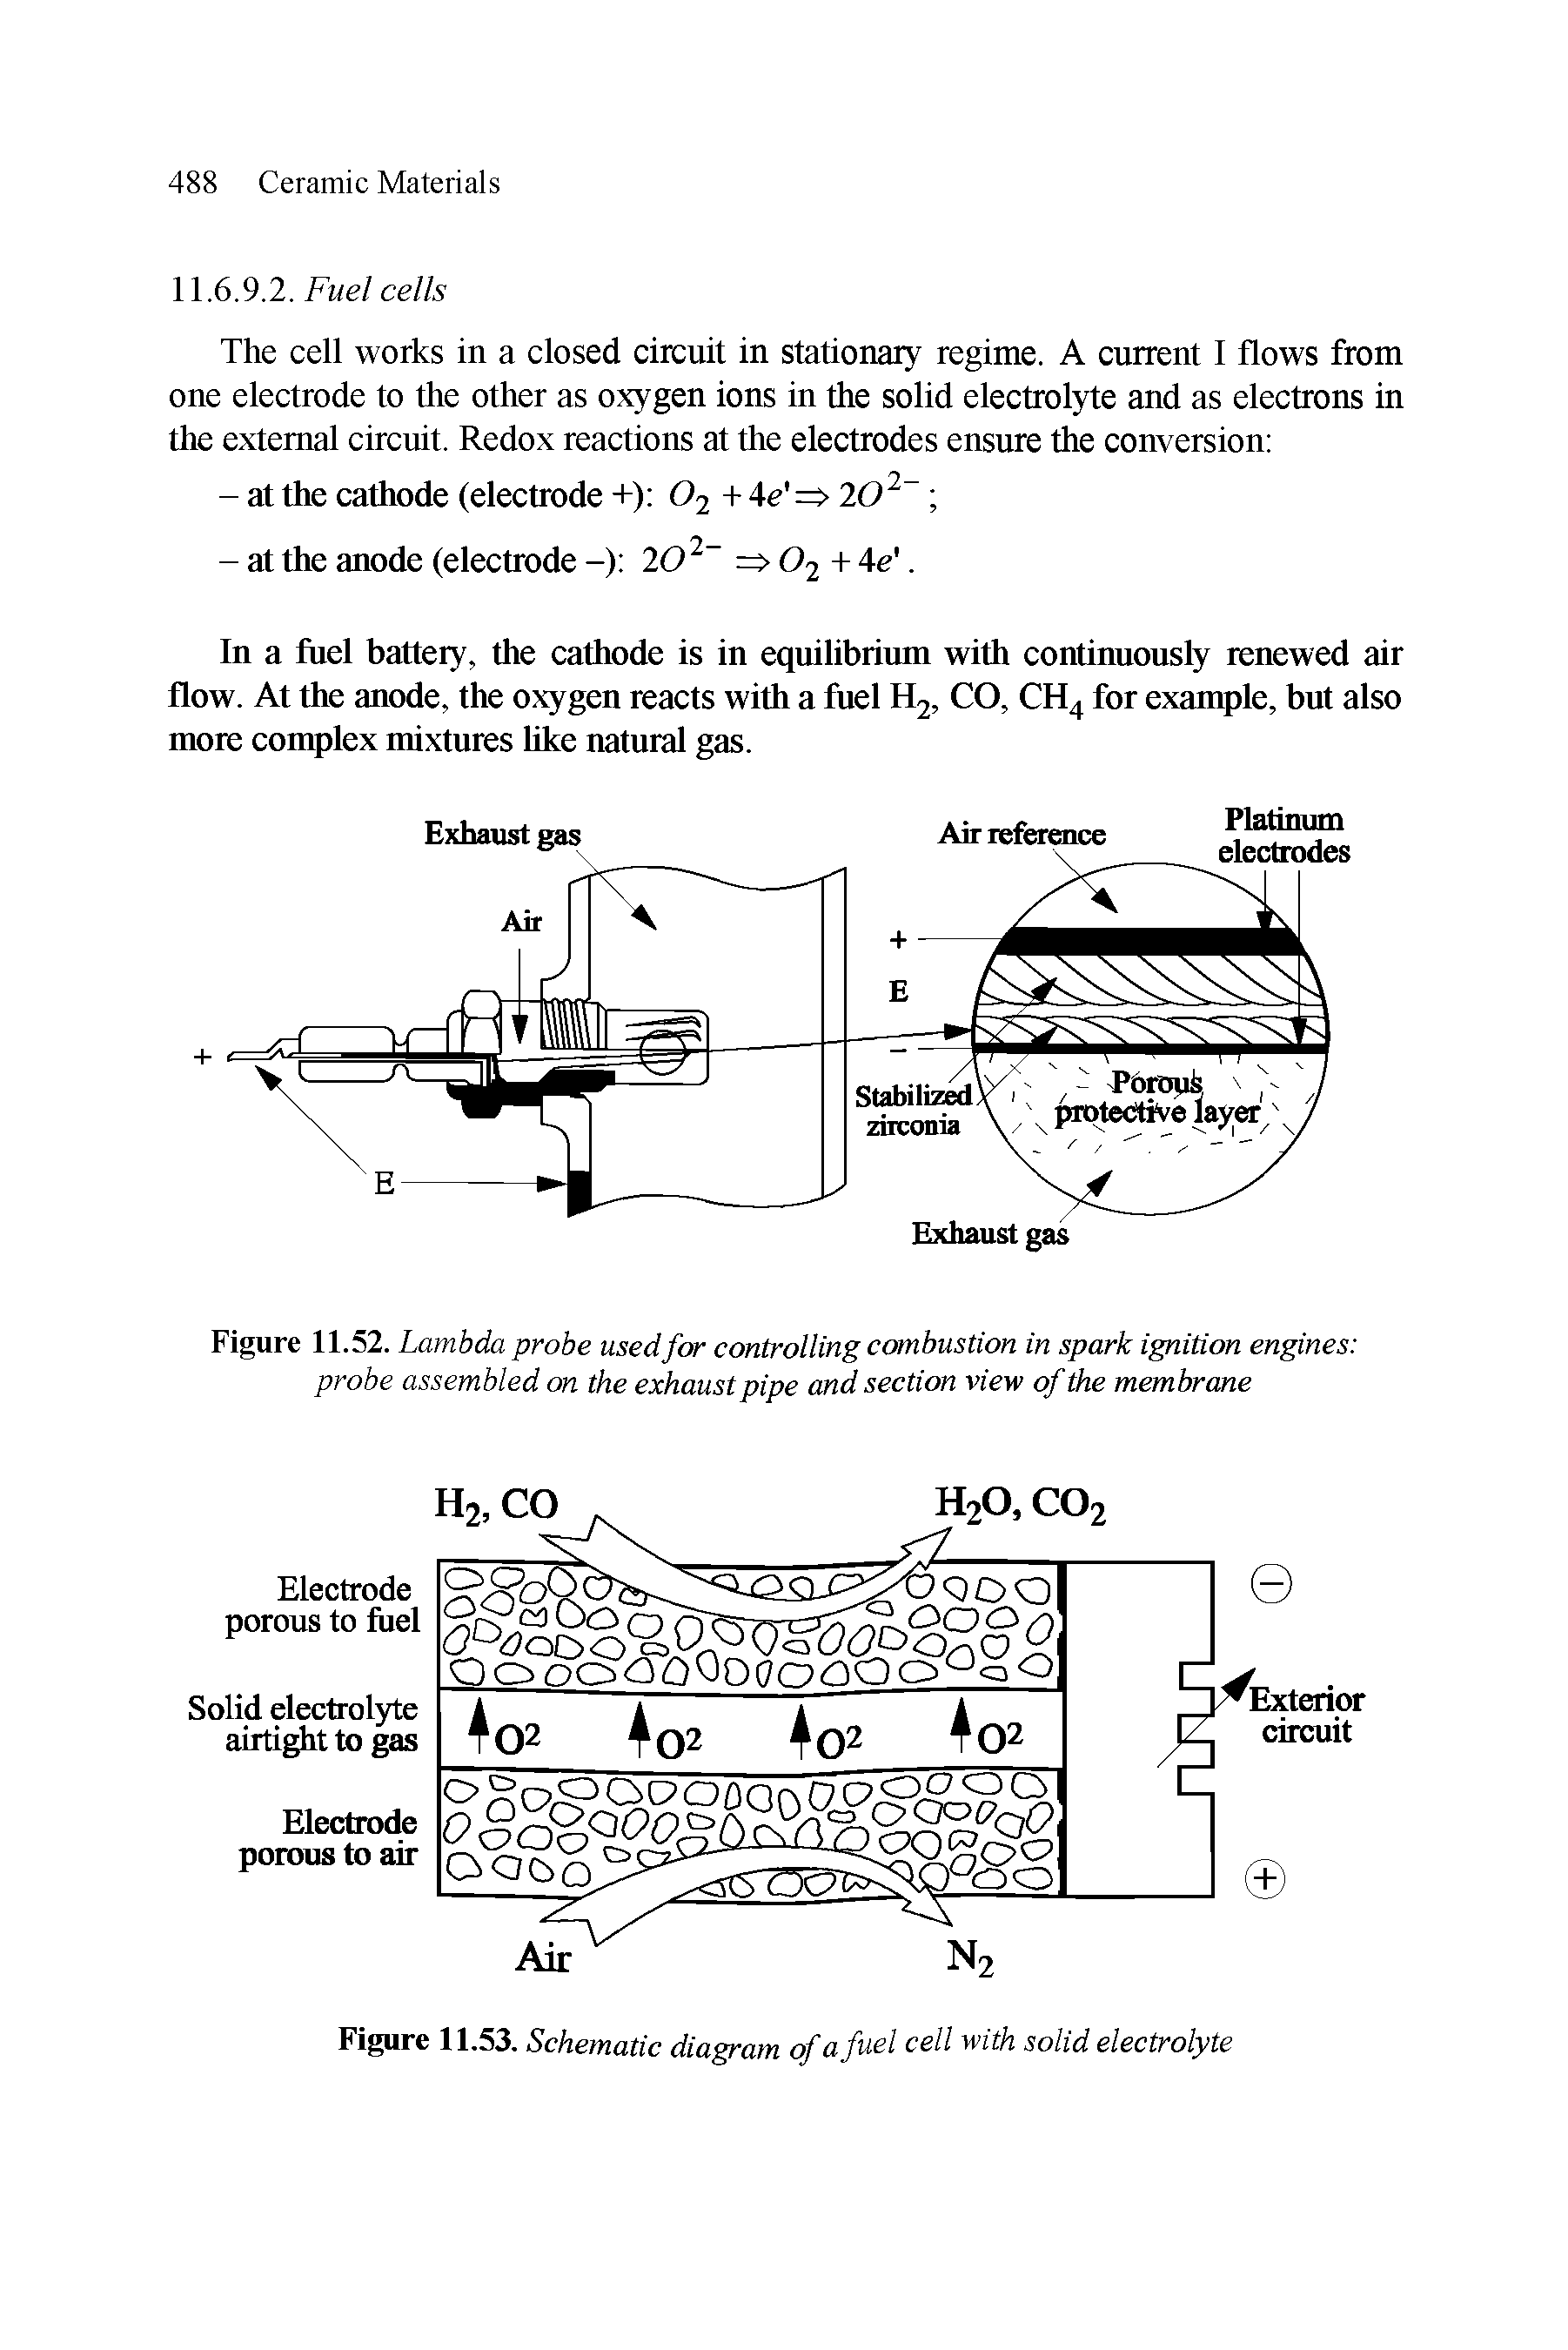 Figure 11.52. Lambda probe usedfor controlling combustion in spark ignition engines probe assembled on the exhaust pipe and section view of the membrane...